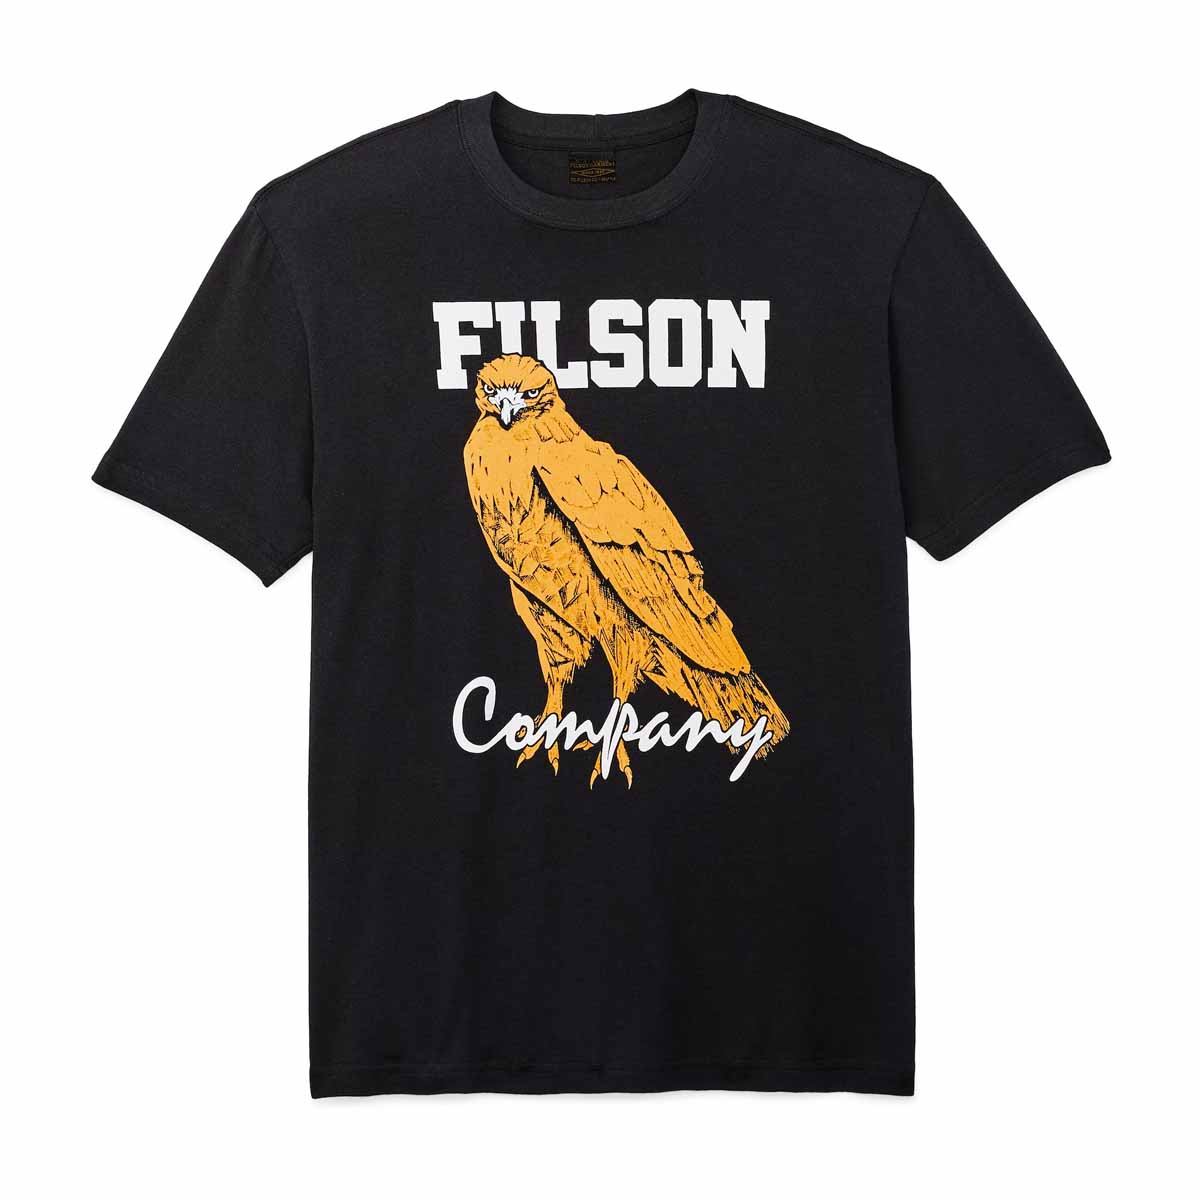 Filson Pioneer Graphic T-Shirt Black/Bird of Grey, a heavy-duty shirt with a dry-hand feel that maintains its structure for season after season of wear